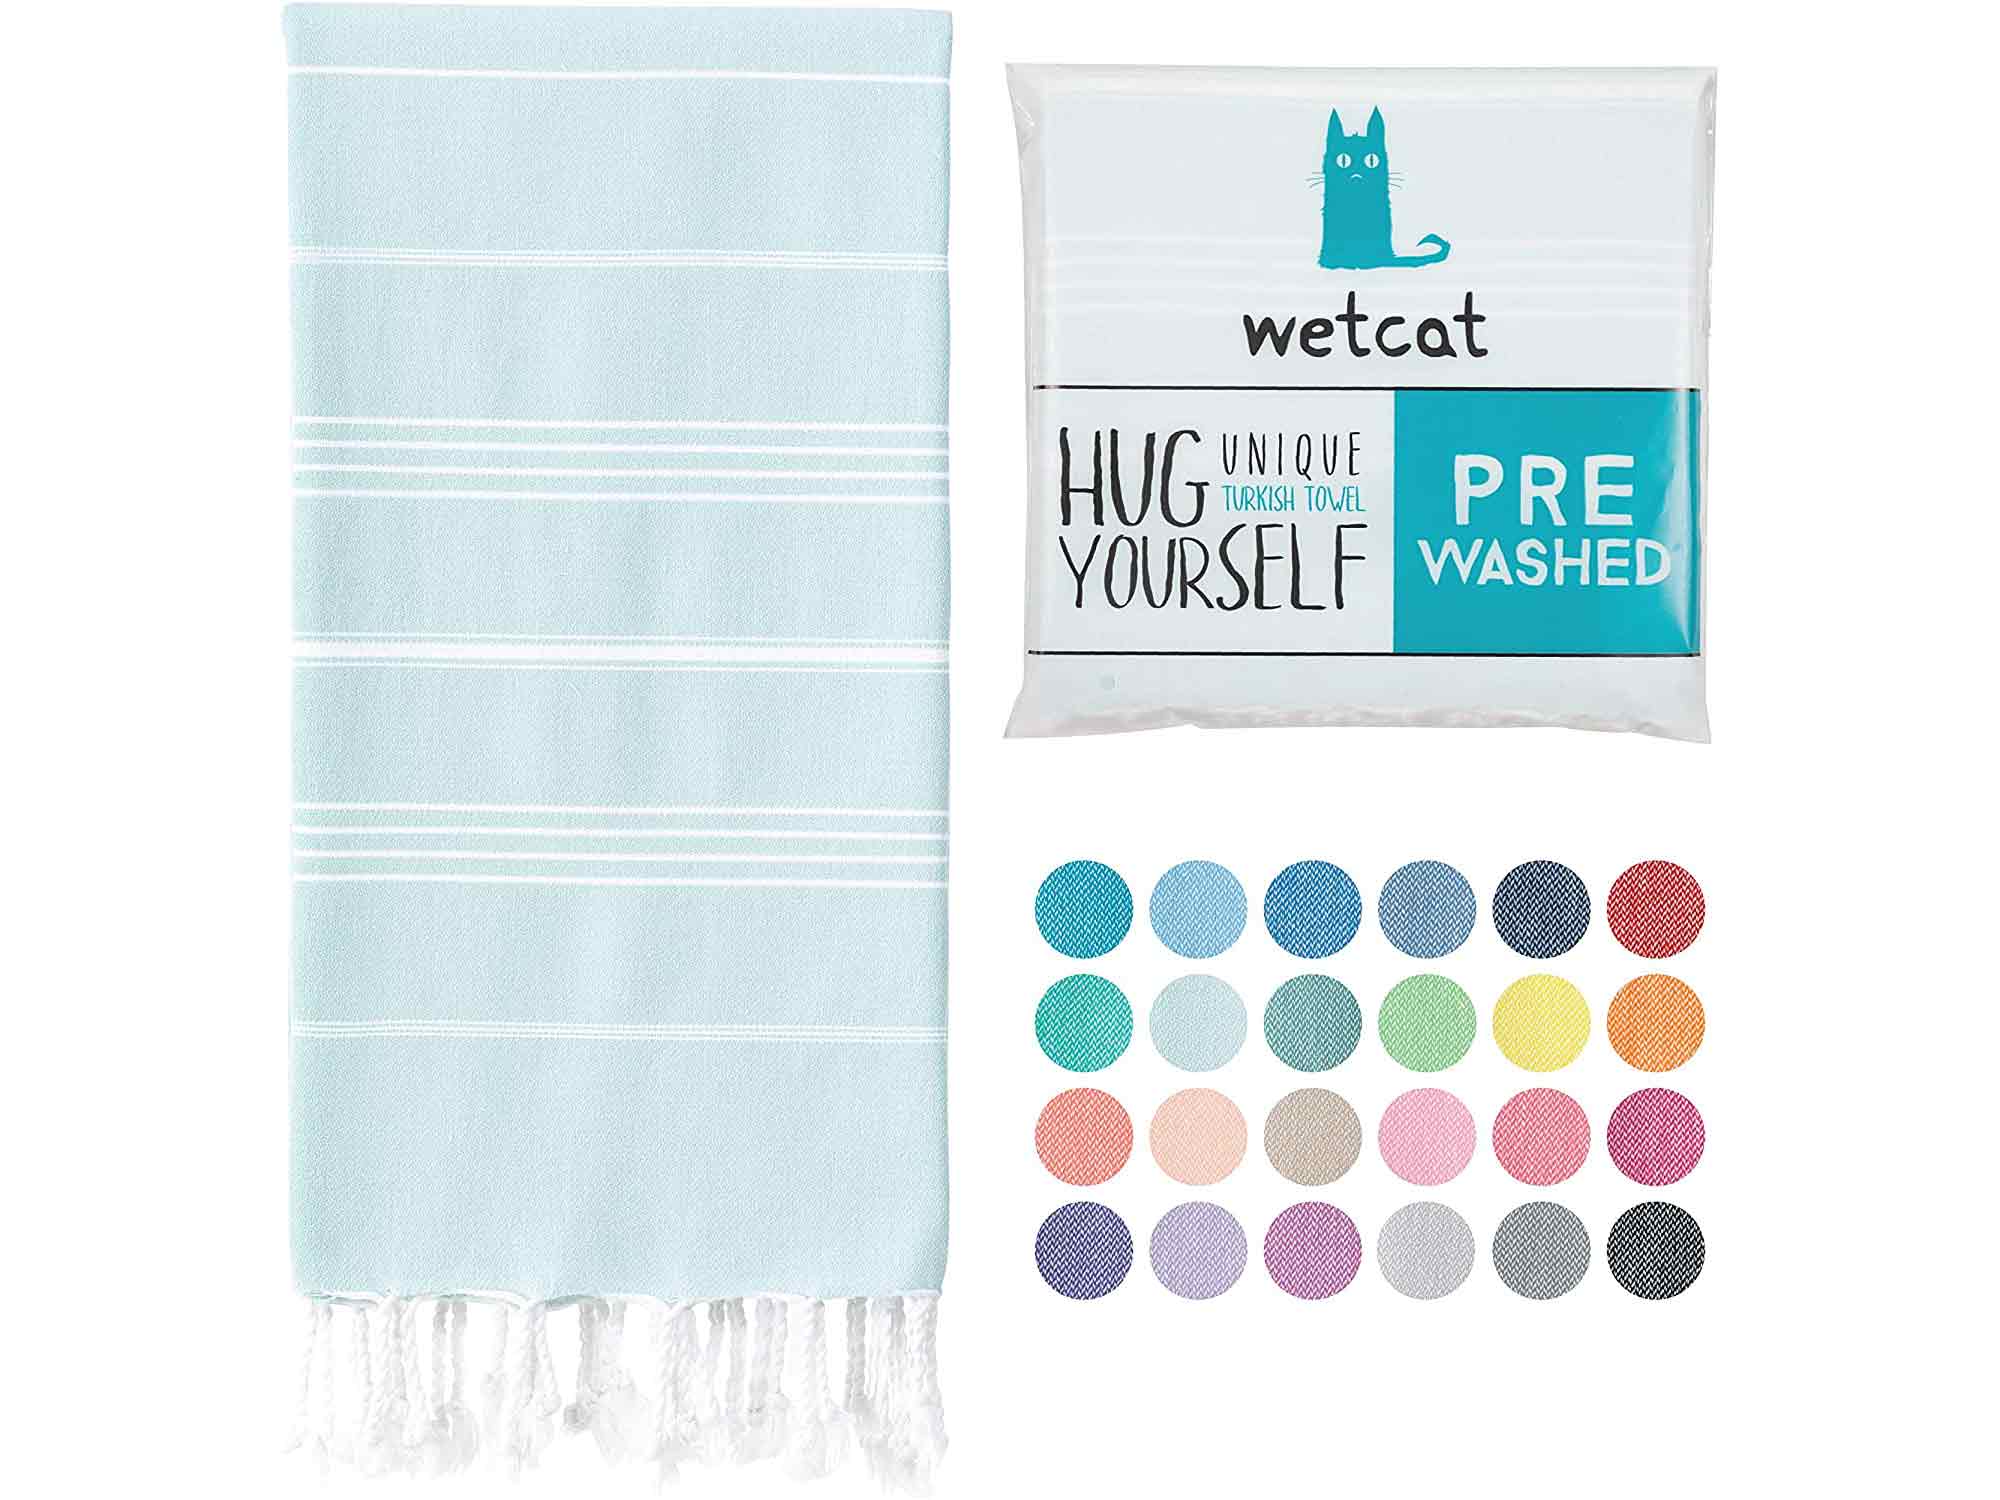 WETCAT Turkish Beach Towel (38 x 71) - Prewashed for Soft Feel, 100% Cotton - Quick Dry Bath Towels with Lively Colors - Unique Turkish Towels for Bathroom - [Aqua]